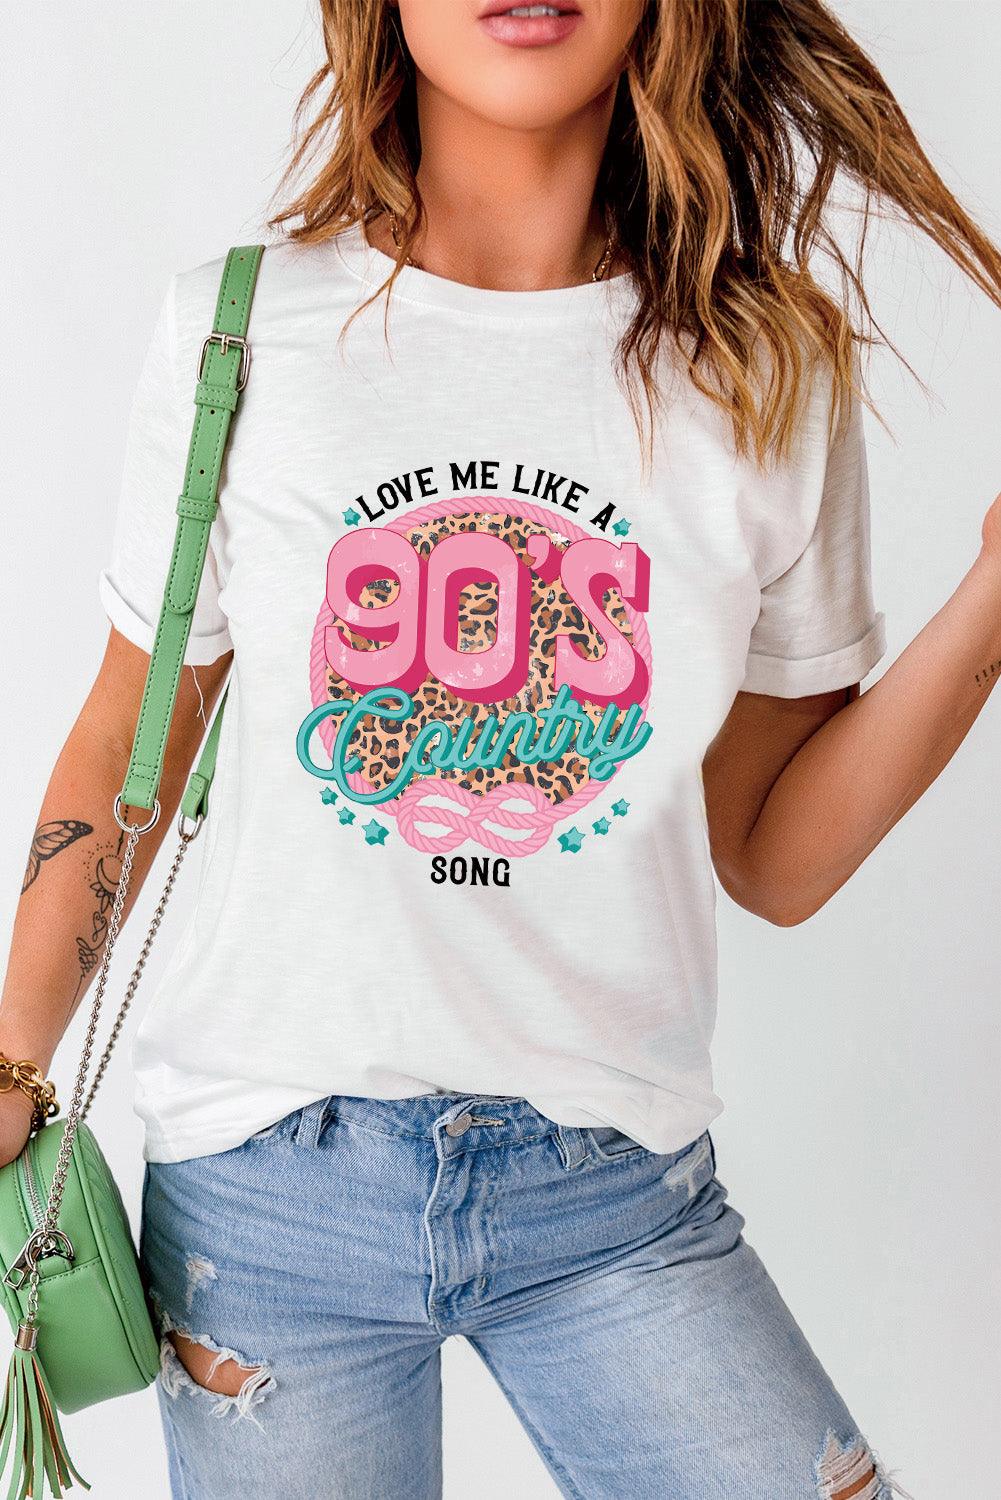 White LOVE ME LIKE A 90’S COUNTRY SONG Graphic Tee - L & M Kee, LLC